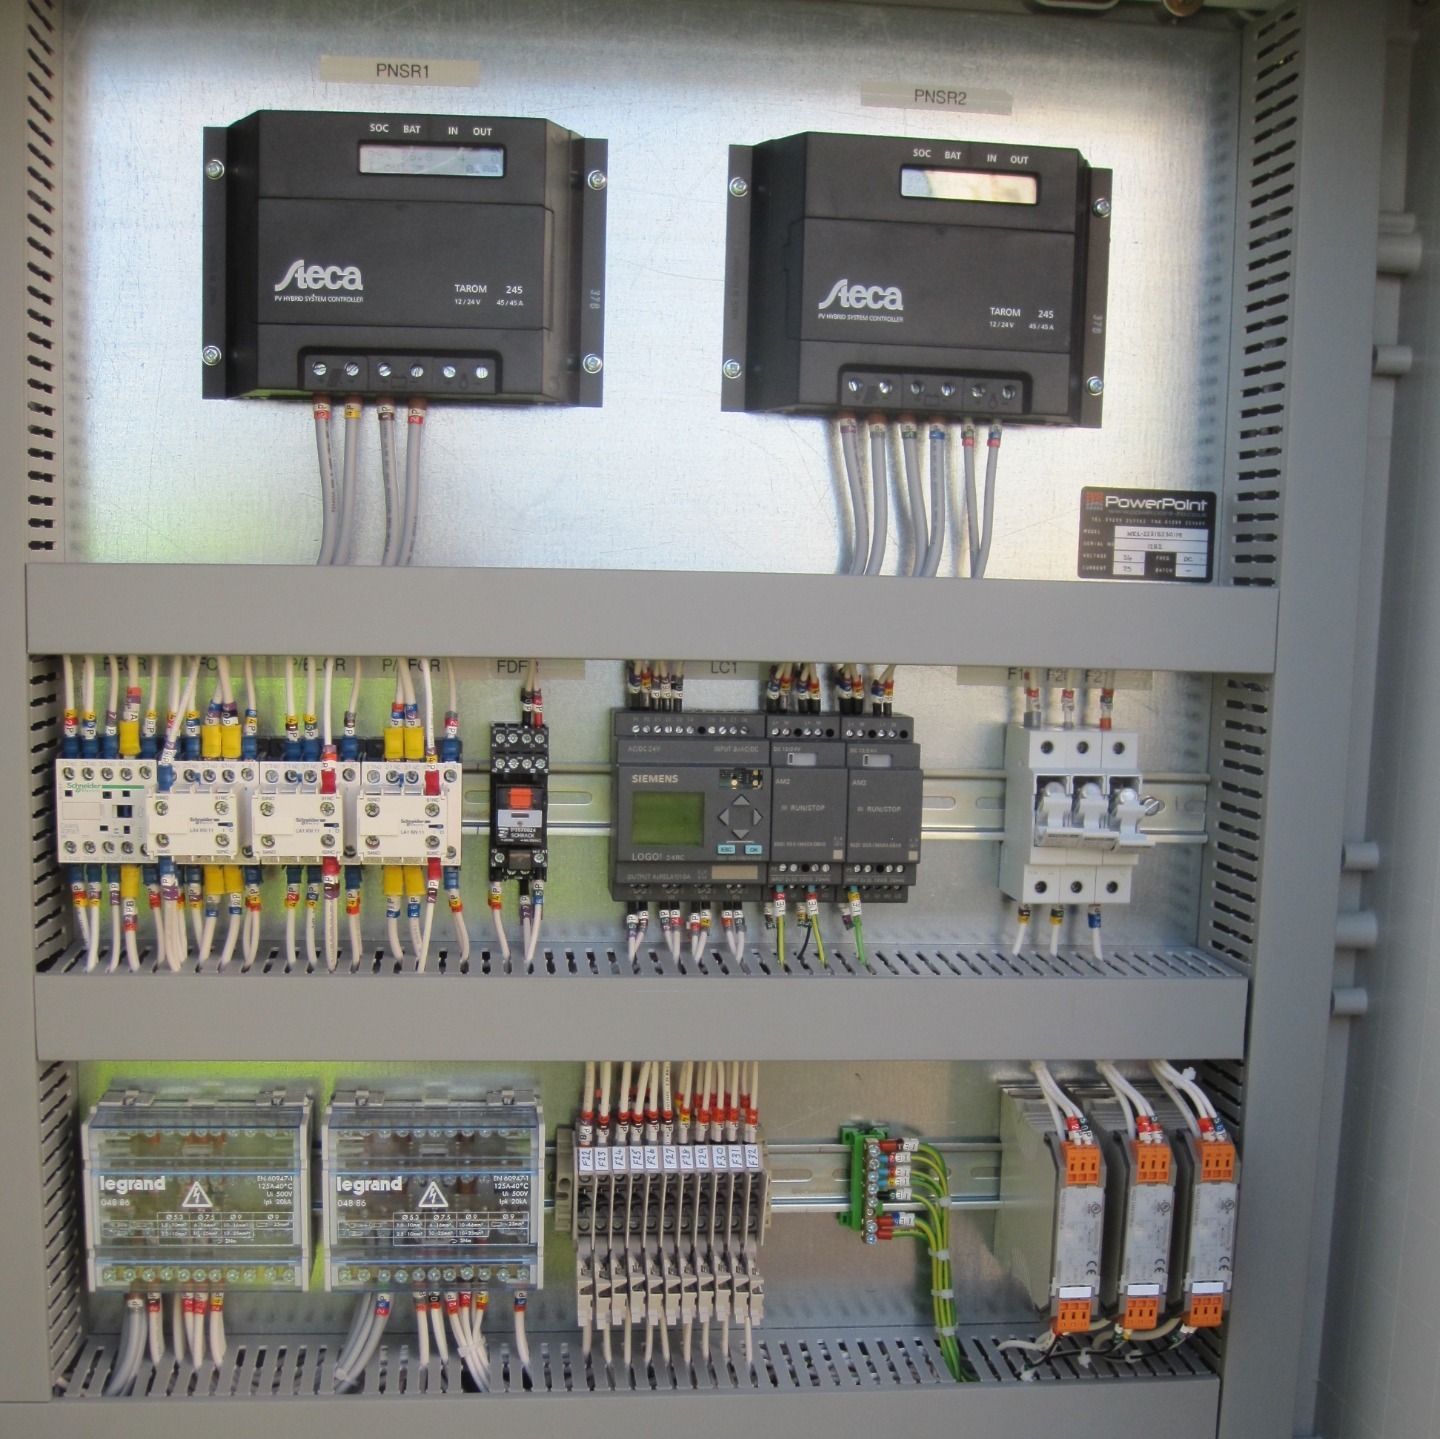 Charge control panel for Hornsea OWF met-tower